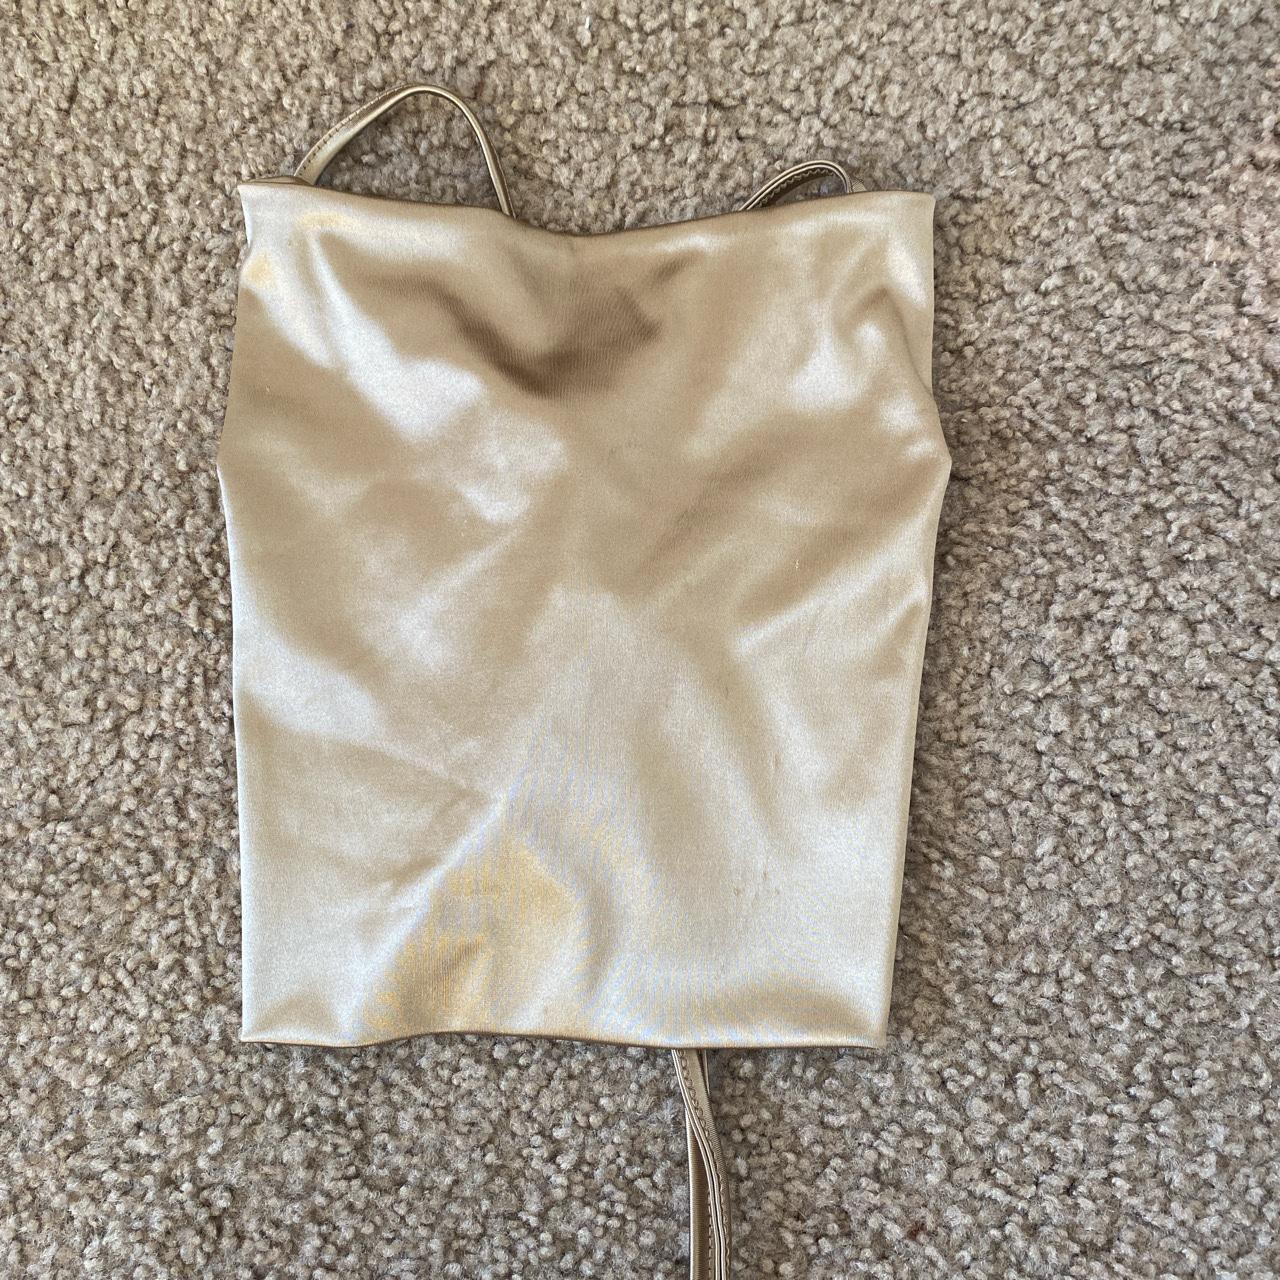 Gold silk top. Like a scarf tie top but it has a... - Depop